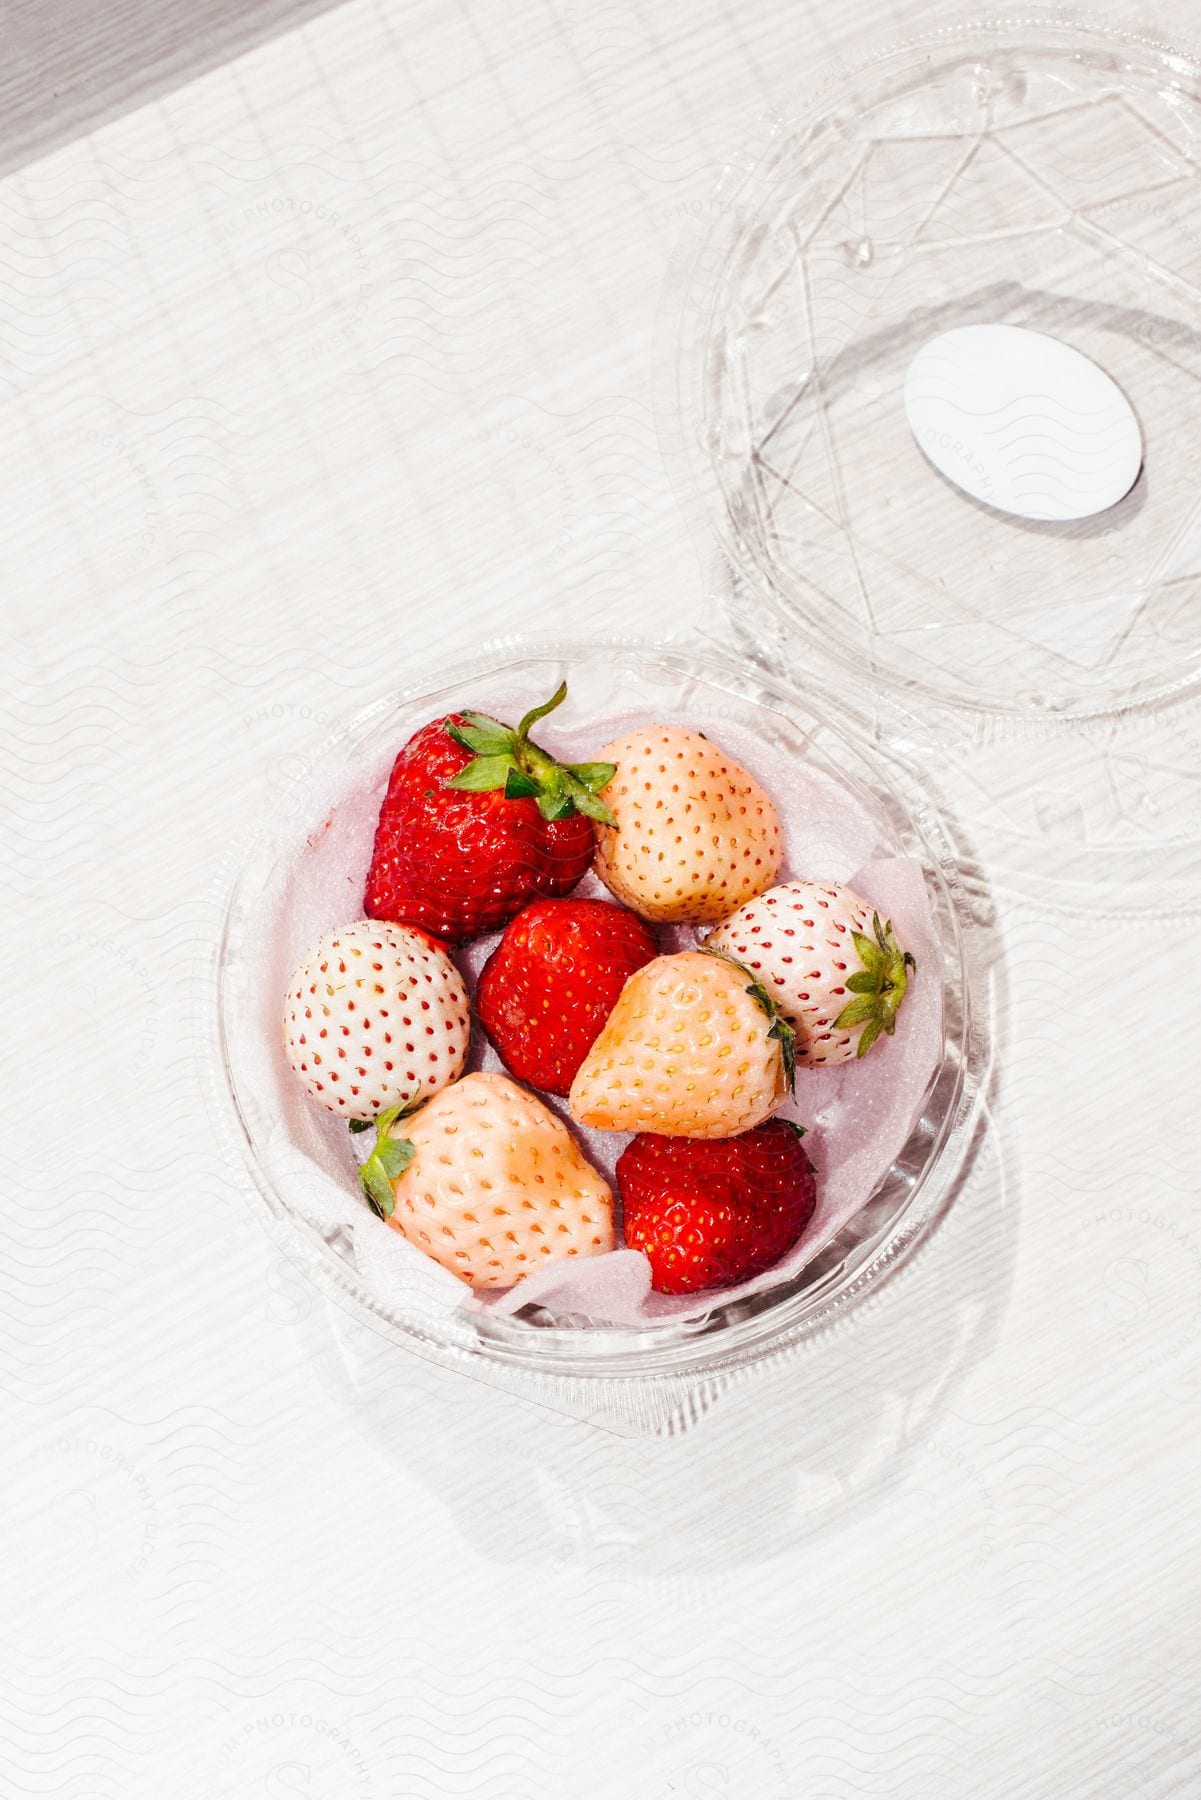 white and red strawberries sit in a plastic container